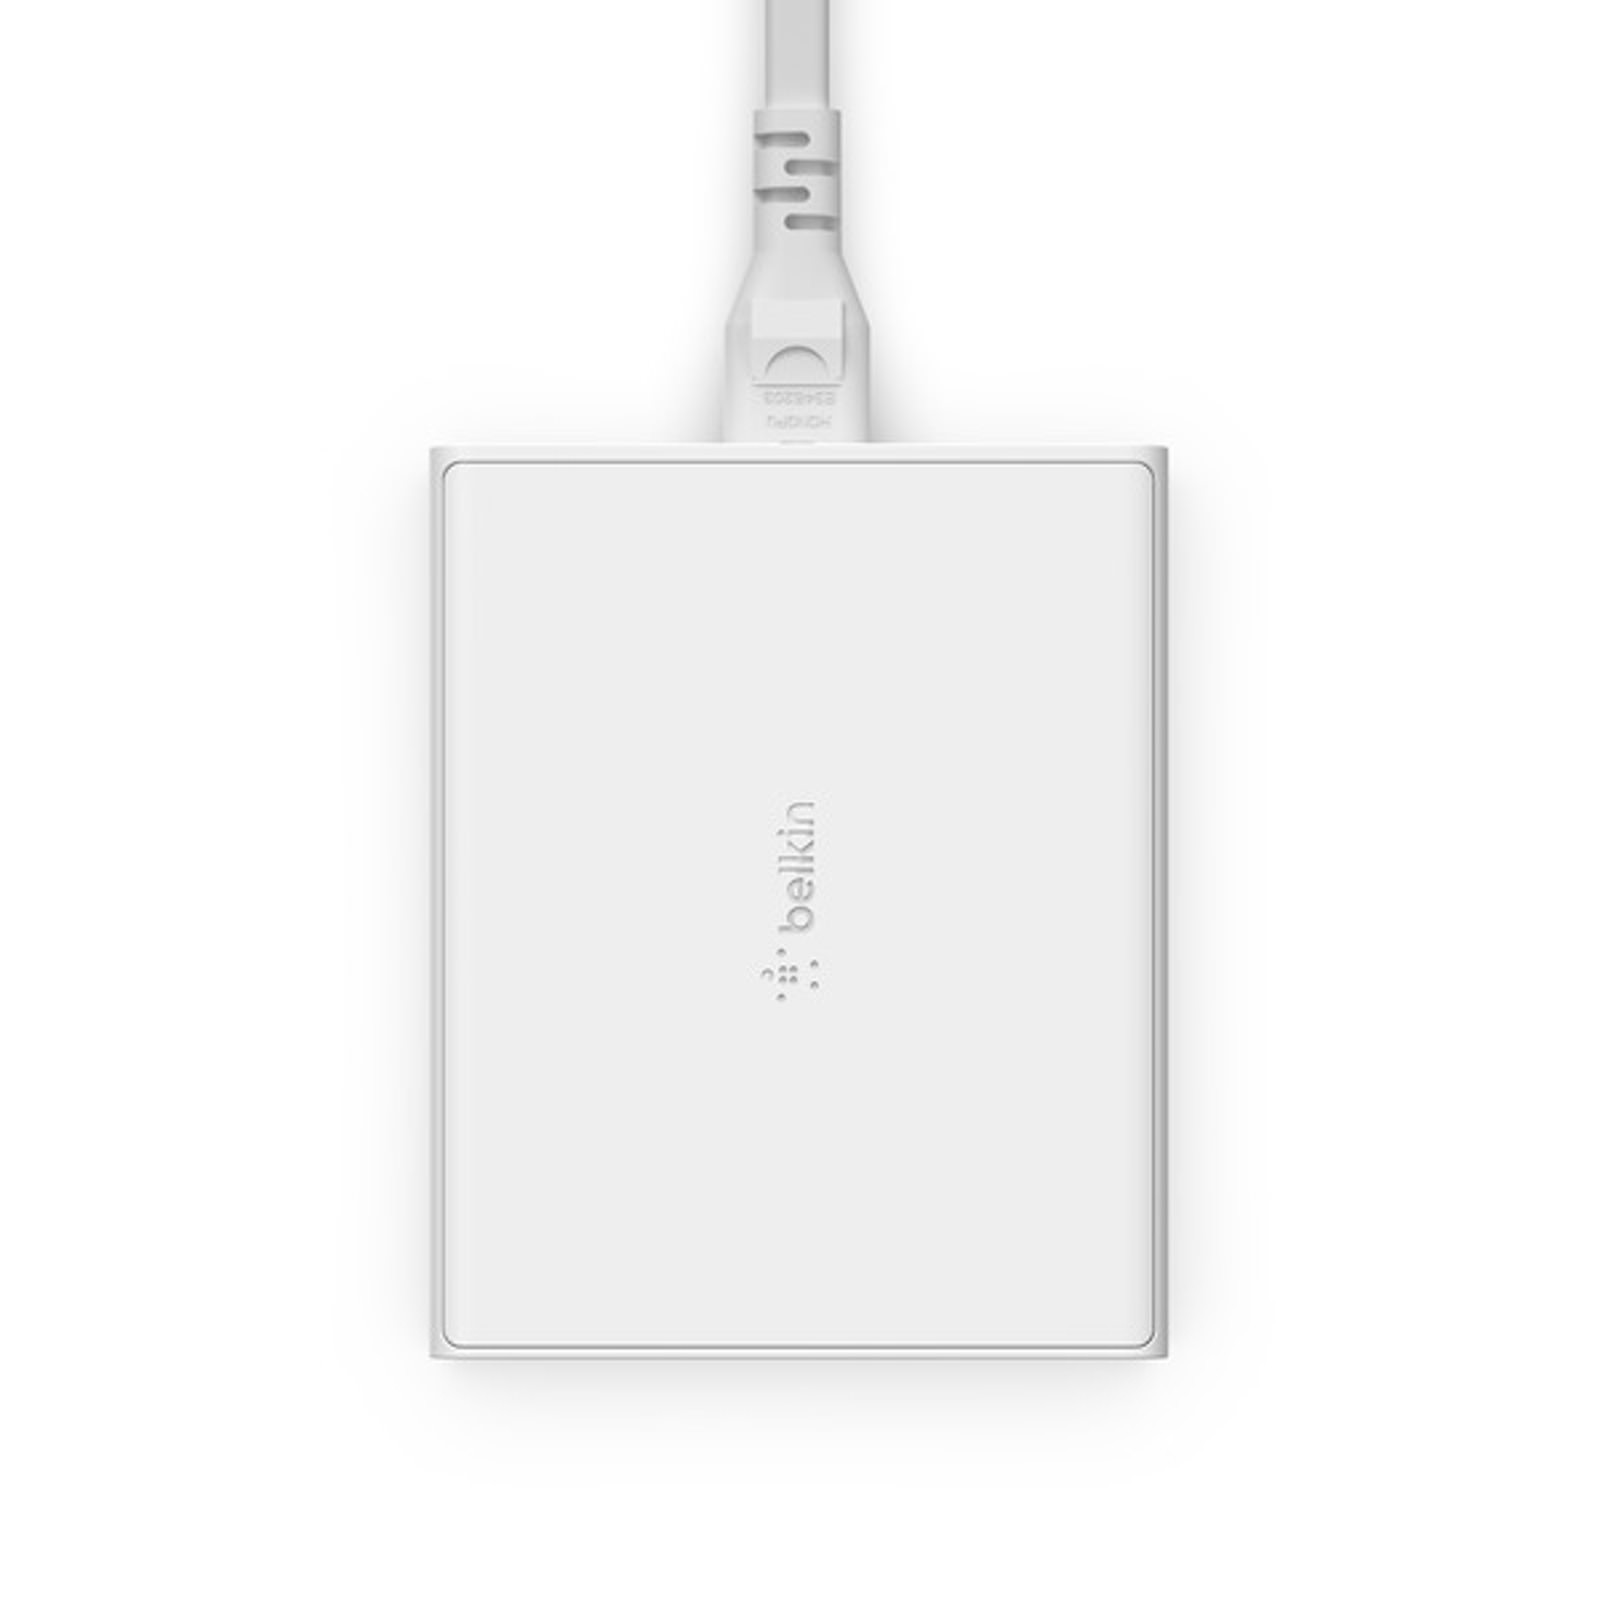 WCH010_Belkin1_MPW253_4-PortUsbCGaNWallCharger108W_Top_Cable_Web.jpg